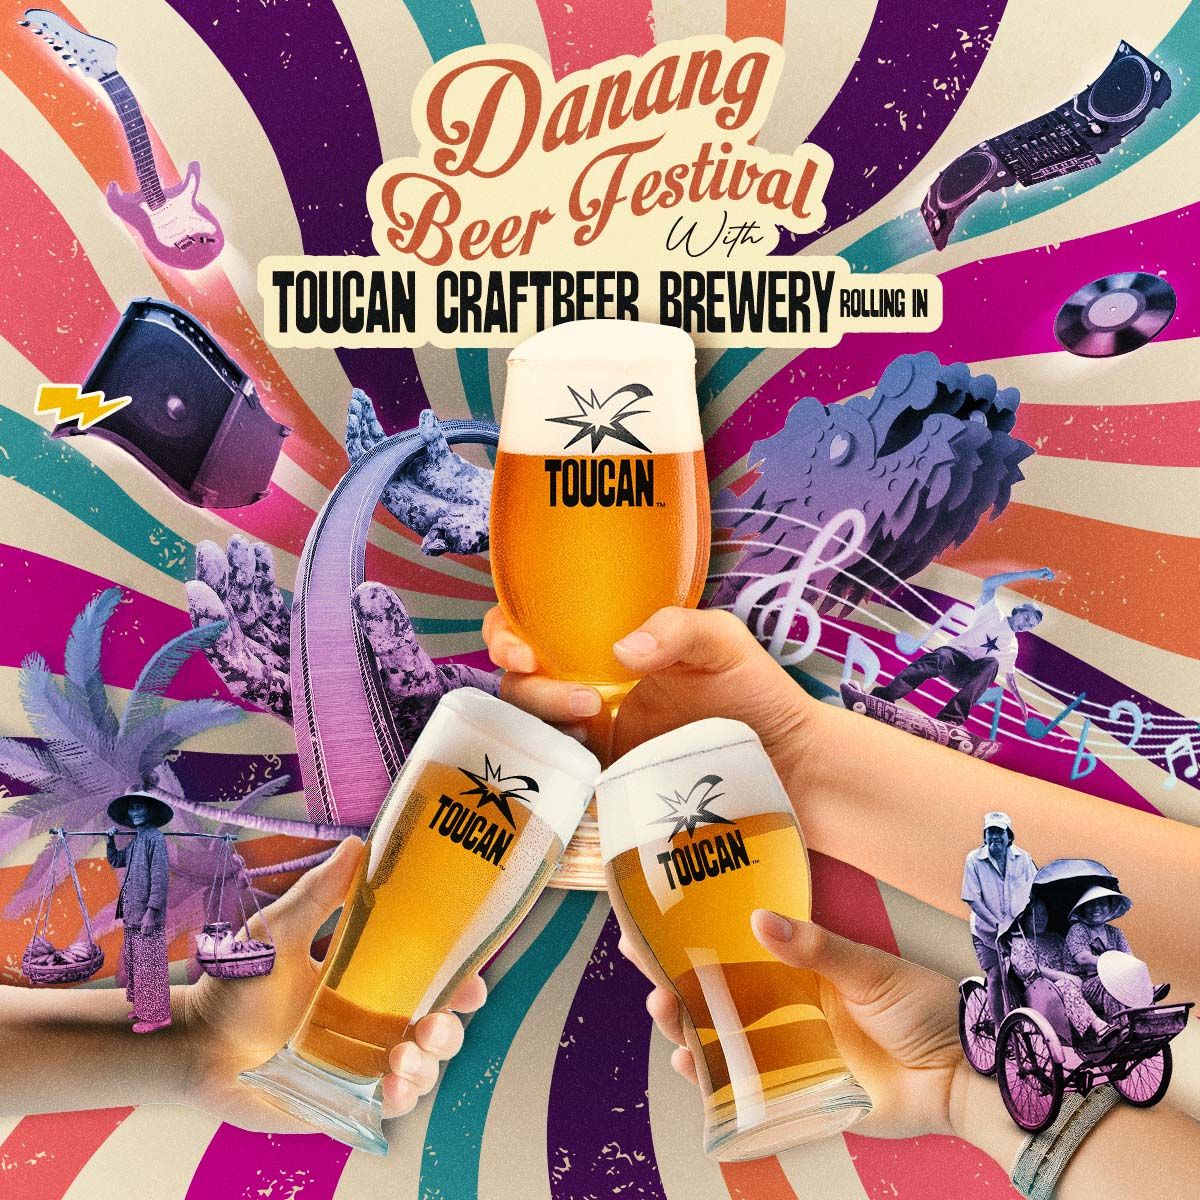 Weekend brew\u2019s more true than your last boo \u2013 Come taste the truth at Da Nang Beer Fest x TOUCAN